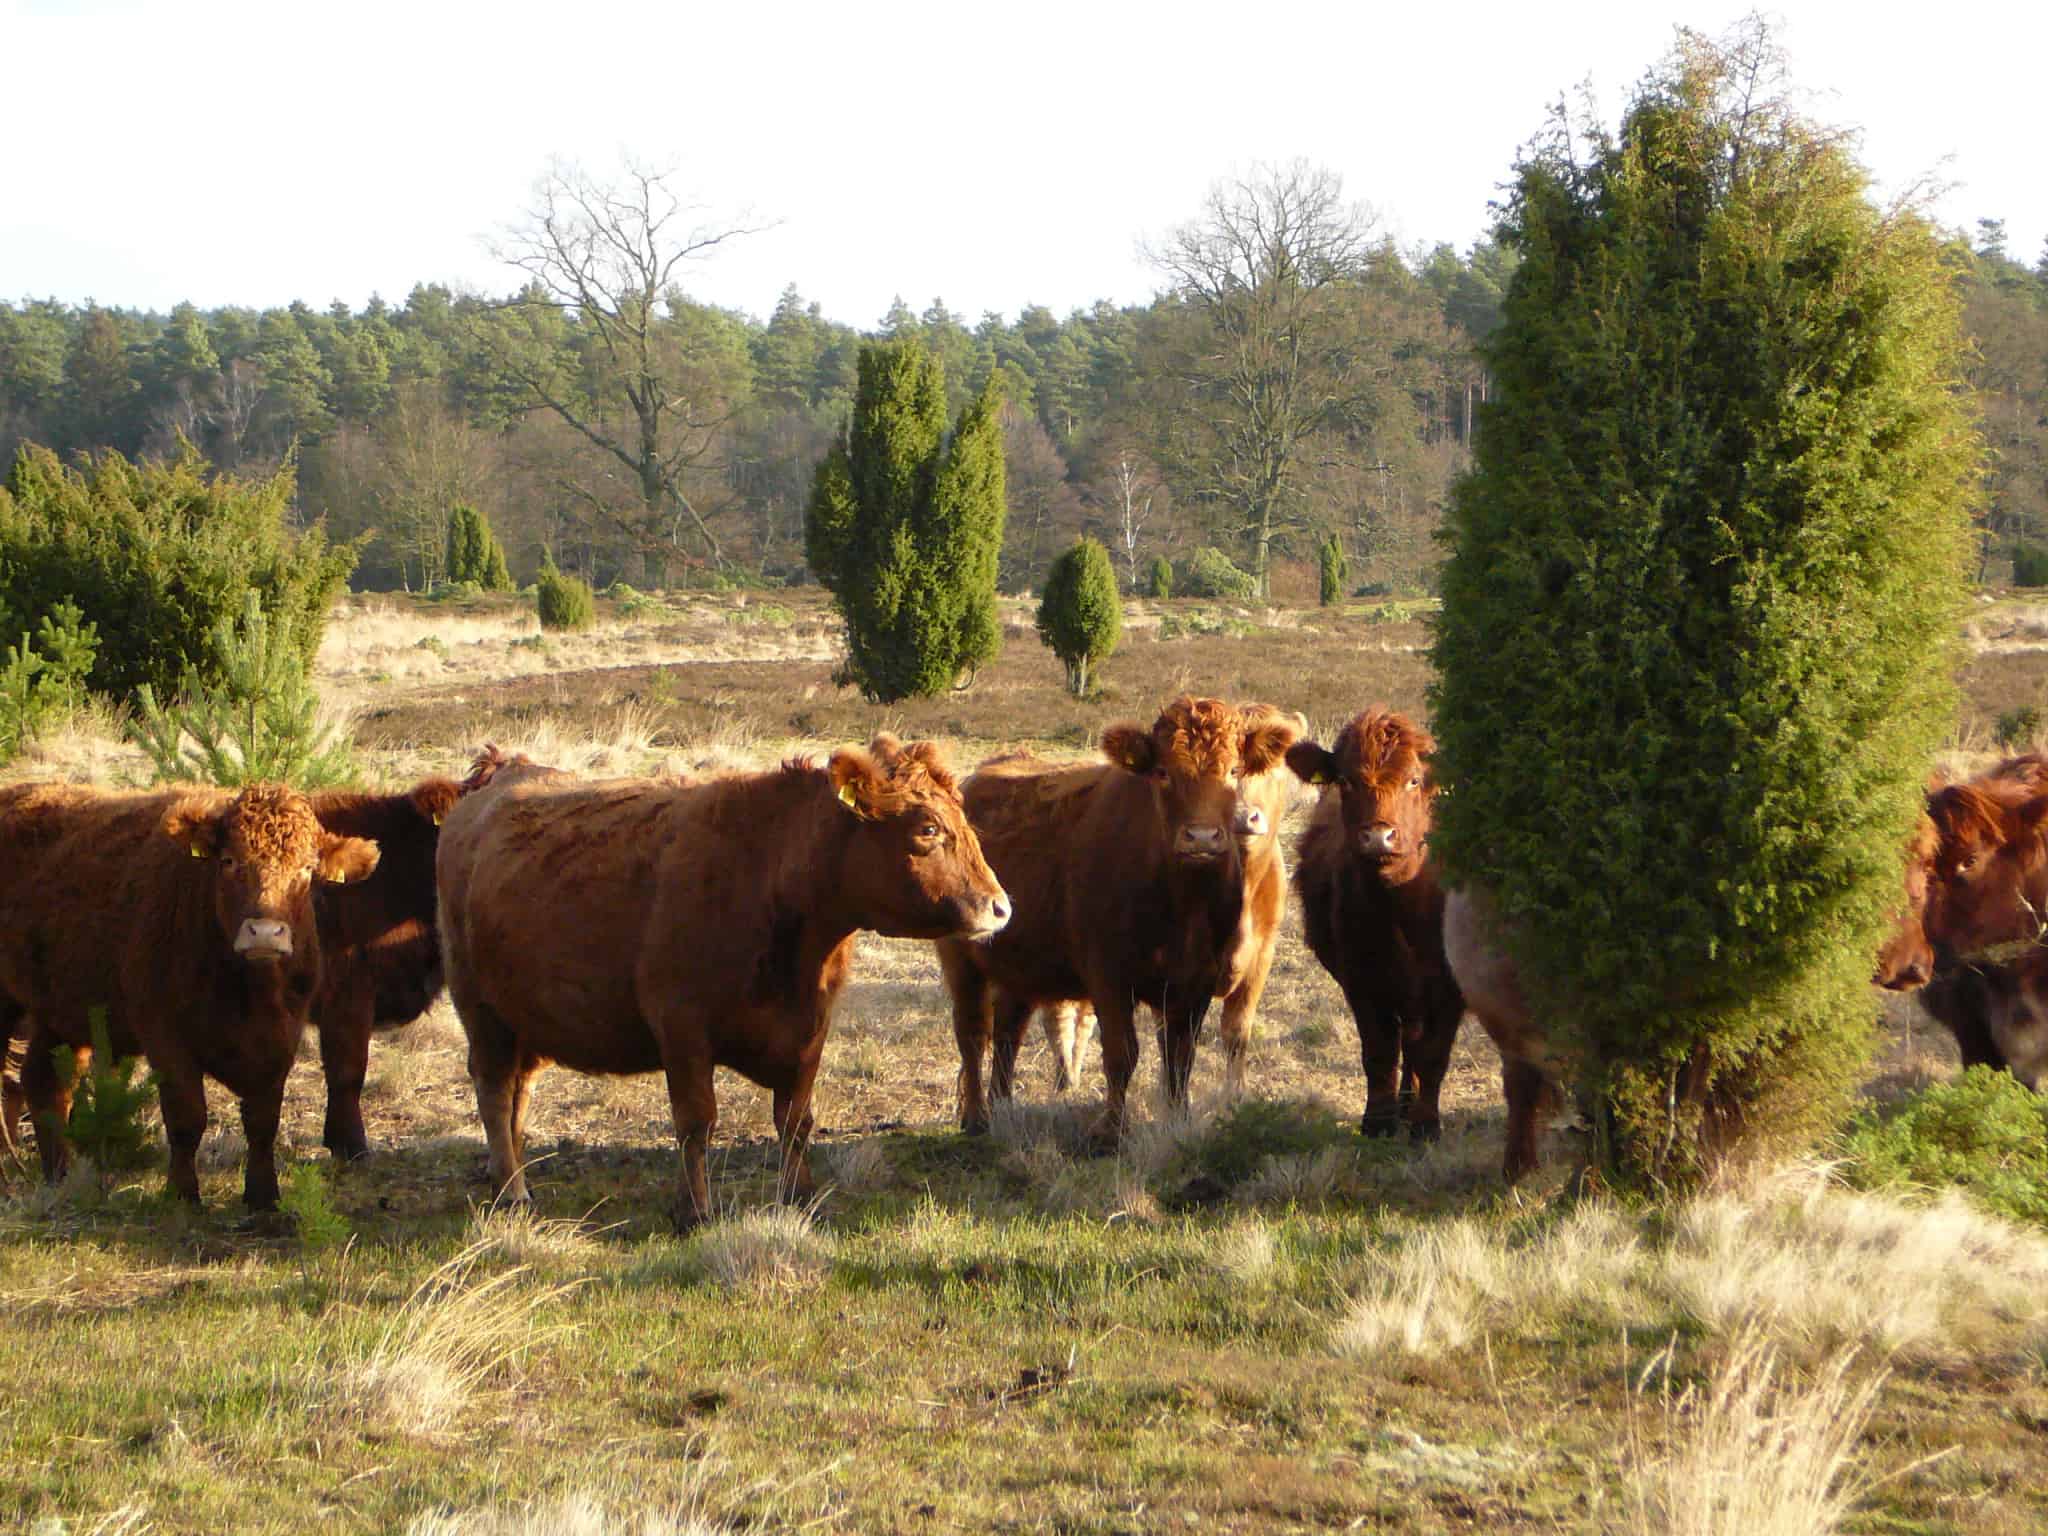 Wilseder Rote cattle in the heath | VNP Stiftung